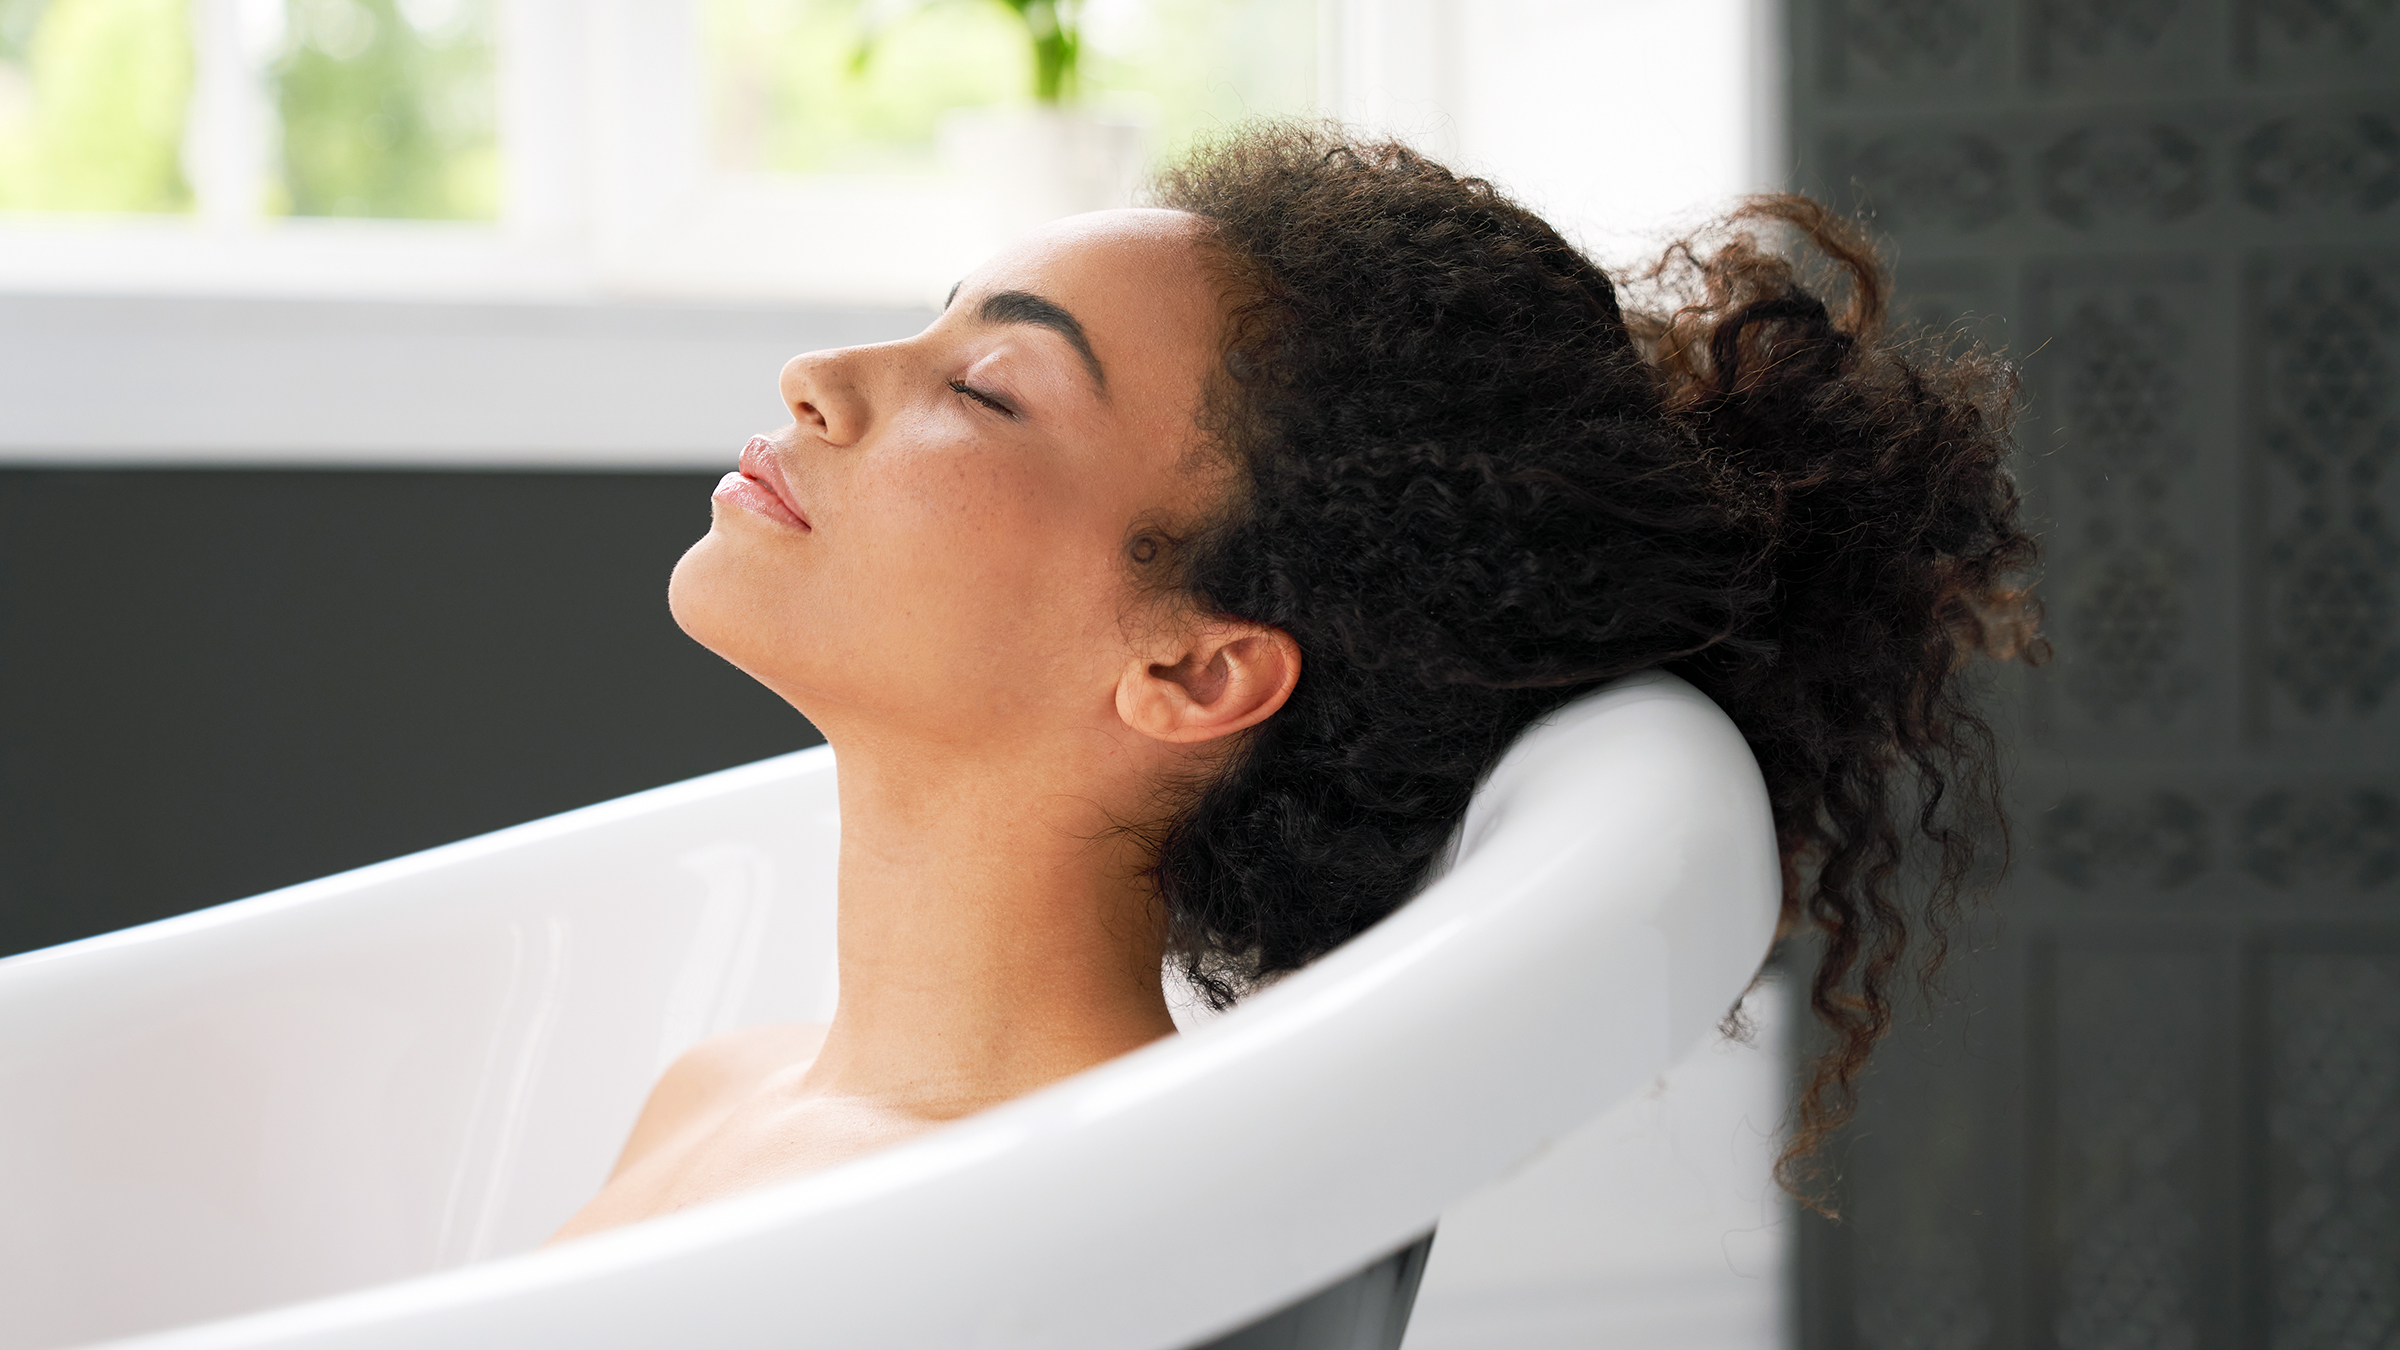 From Relieving Stress to Easing Pain: Here's Why You Should Take A Hot Bath